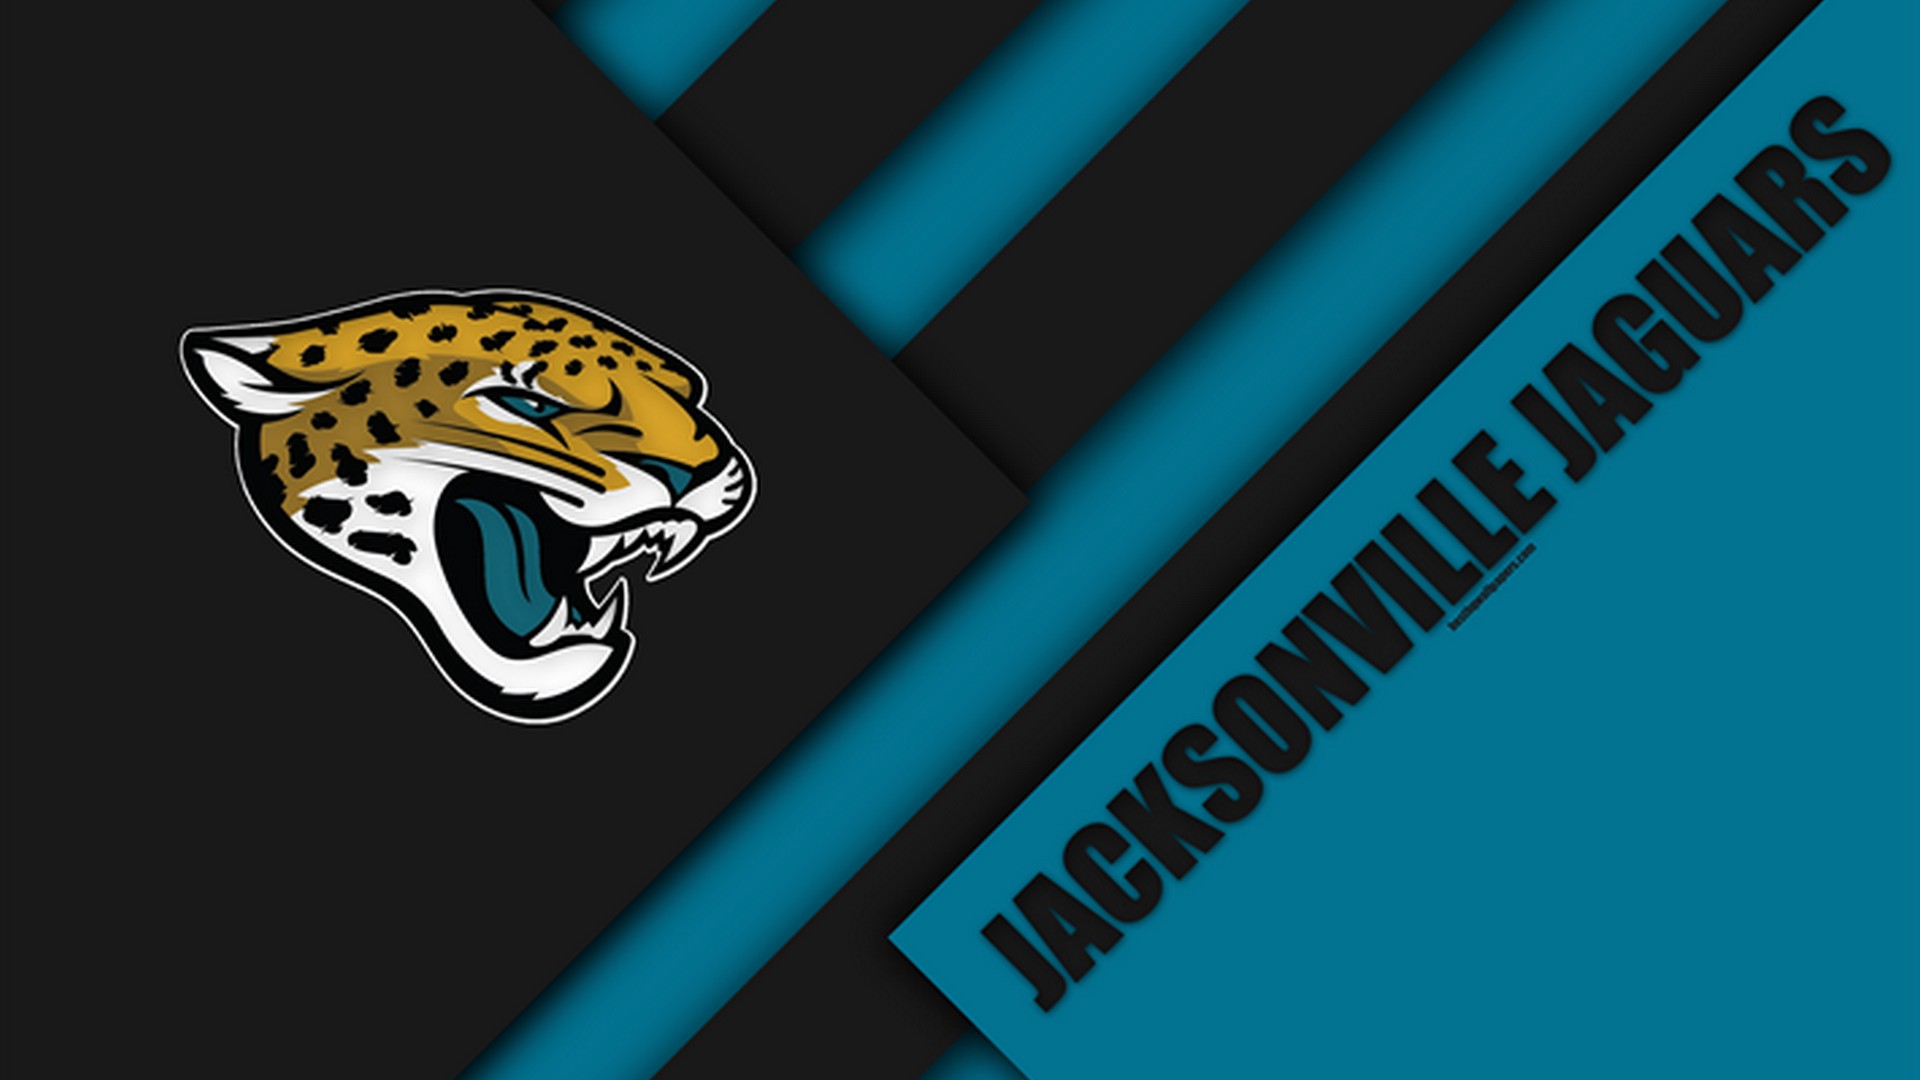 Jacksonville Jaguars Laptop Wallpaper with high-resolution 1920x1080 pixel. Download and set as wallpaper for Desktop Computer, Apple iPhone X, XS Max, XR, 8, 7, 6, SE, iPad, Android